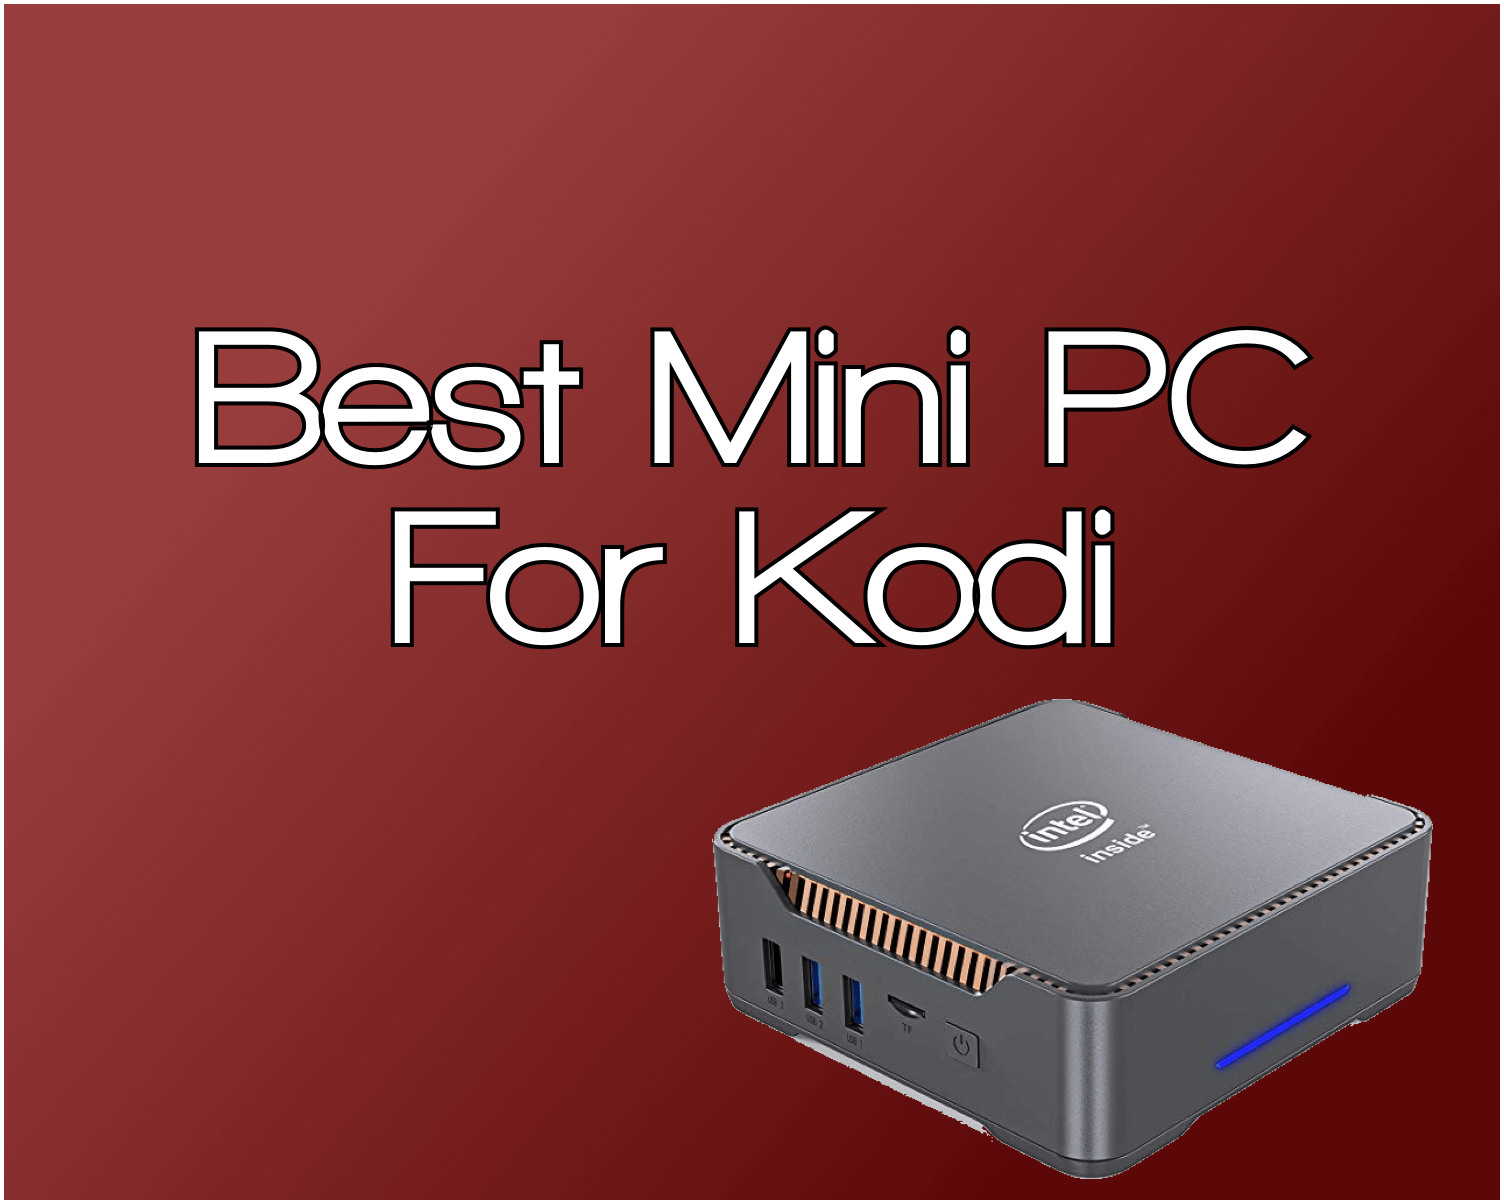 Best Mini PC For Kodi and Streaming